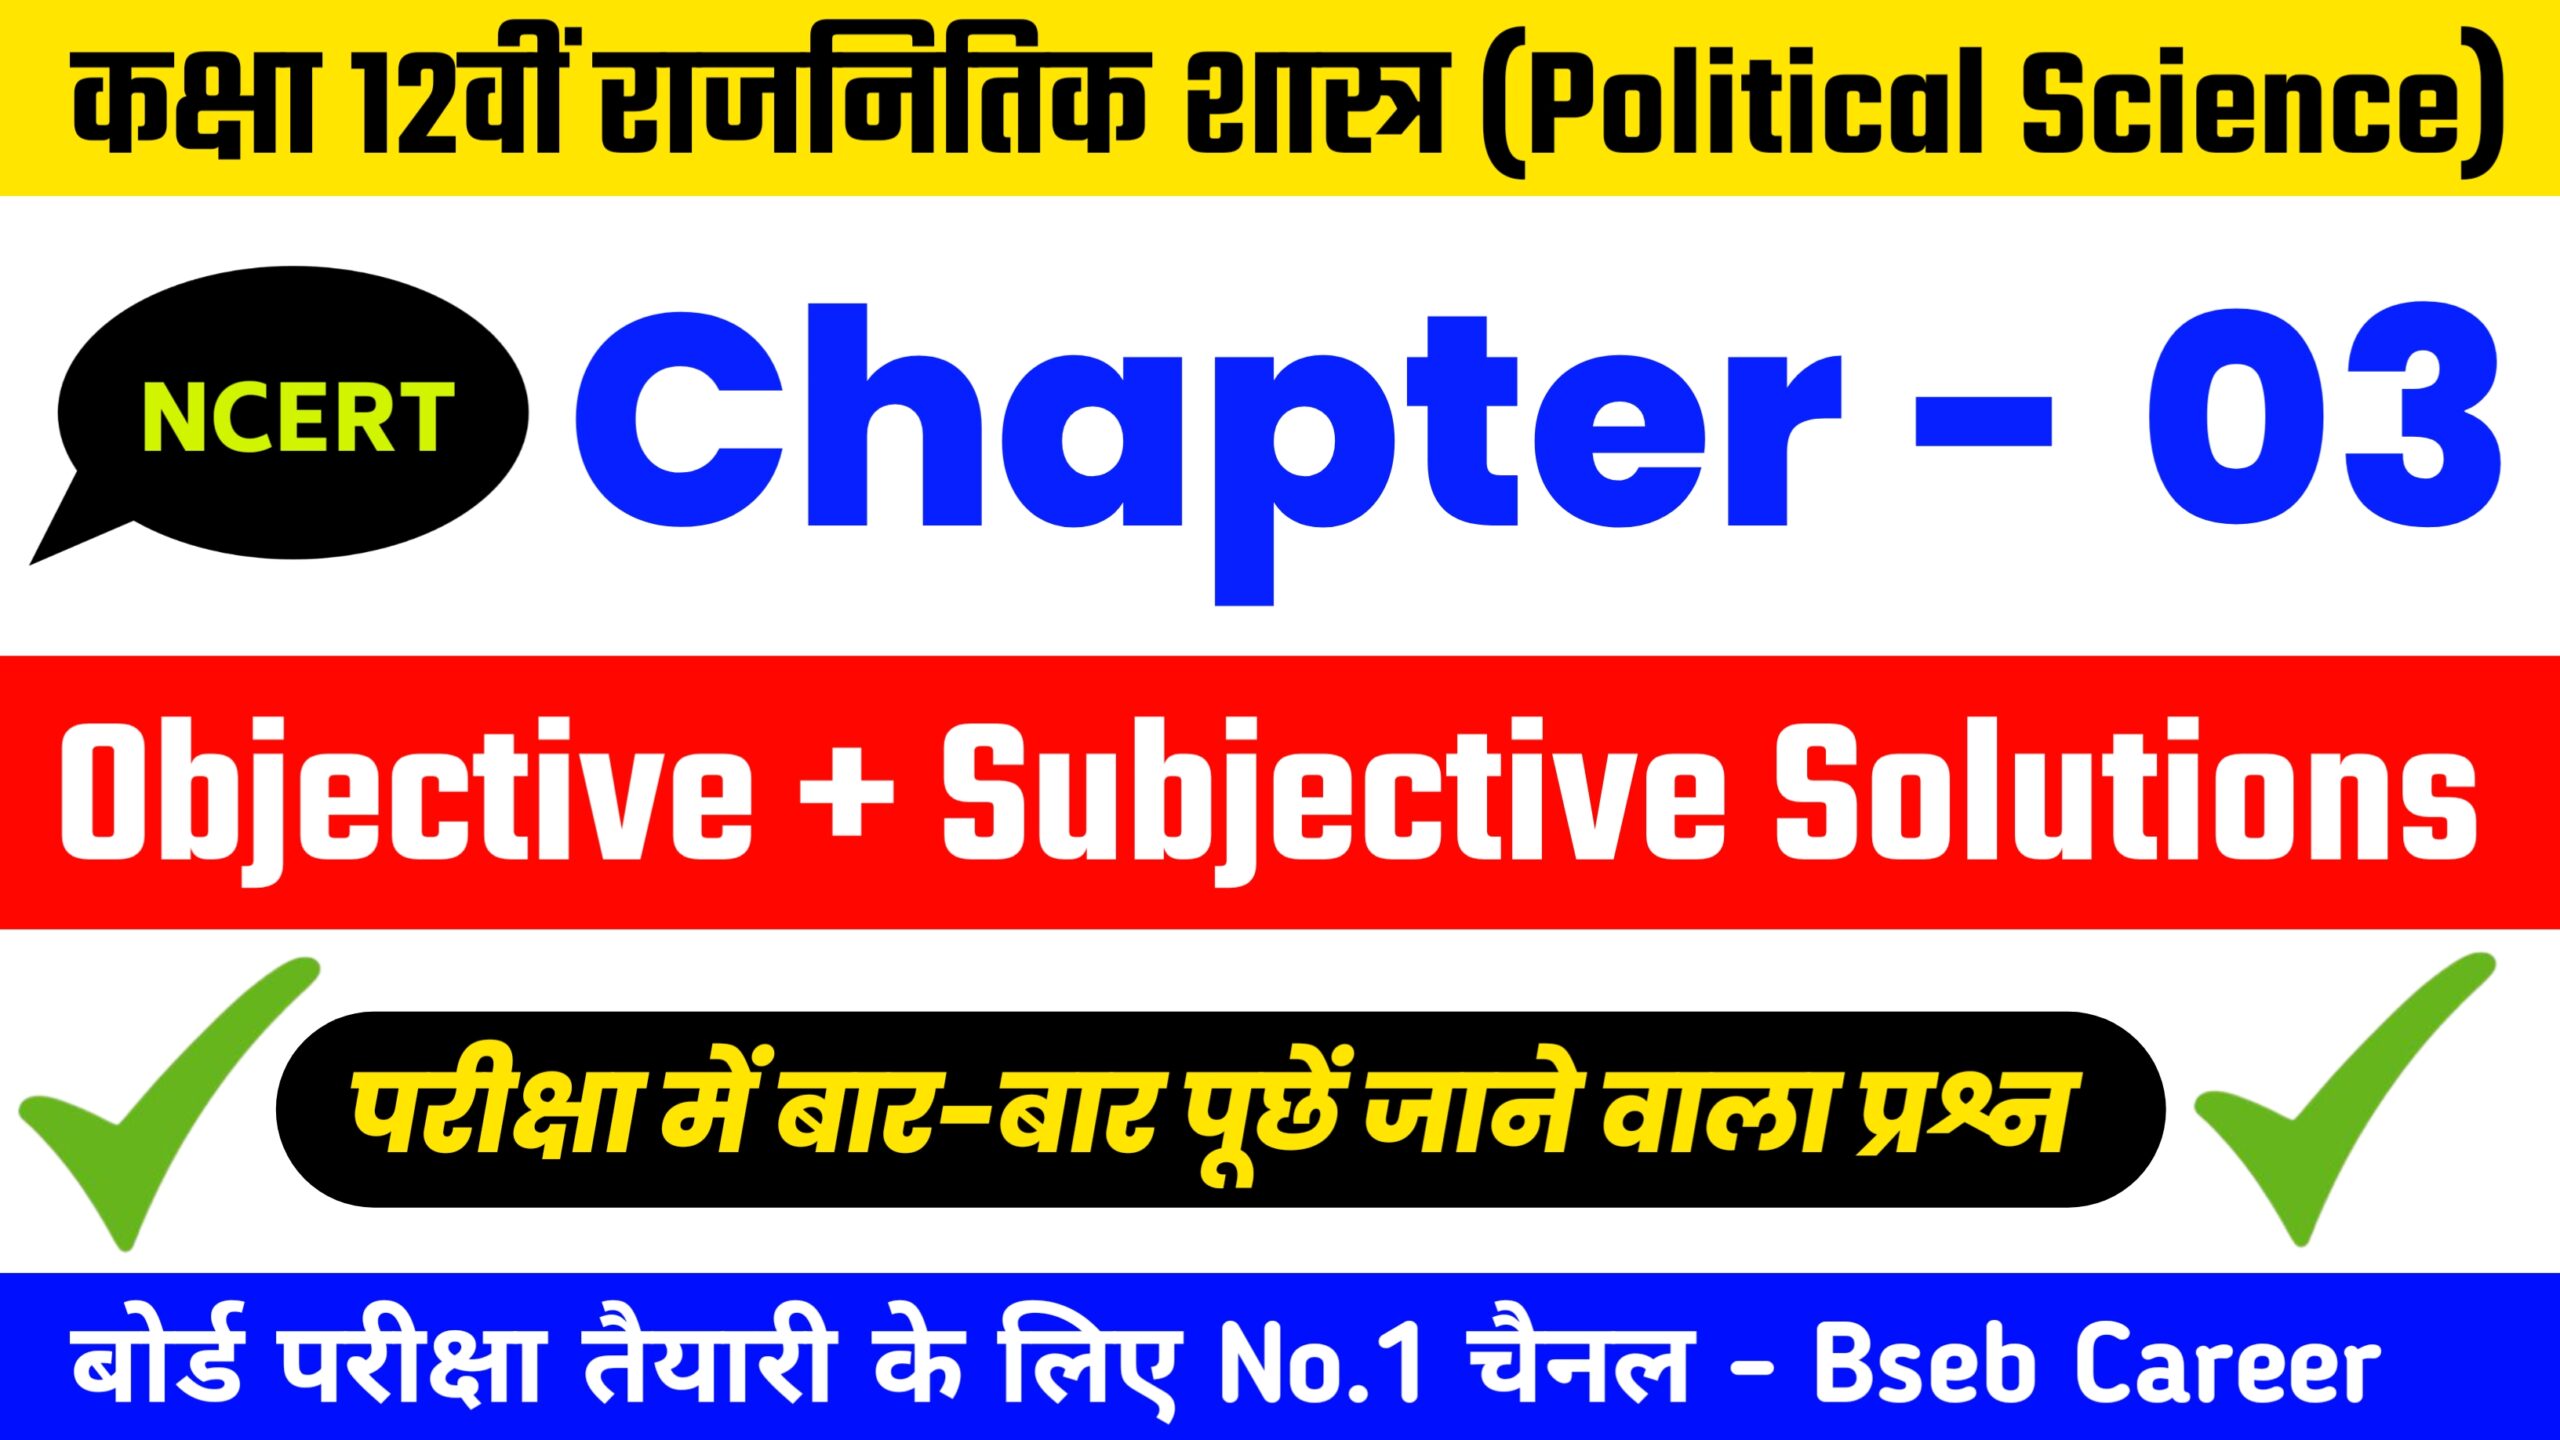 Class 12th Political Science Chapter 3 Solutions In Hindi, Class 12th Political Science Chapter 3 Objective Question Answer, Class 12th Political Science Subjective Question Answer.